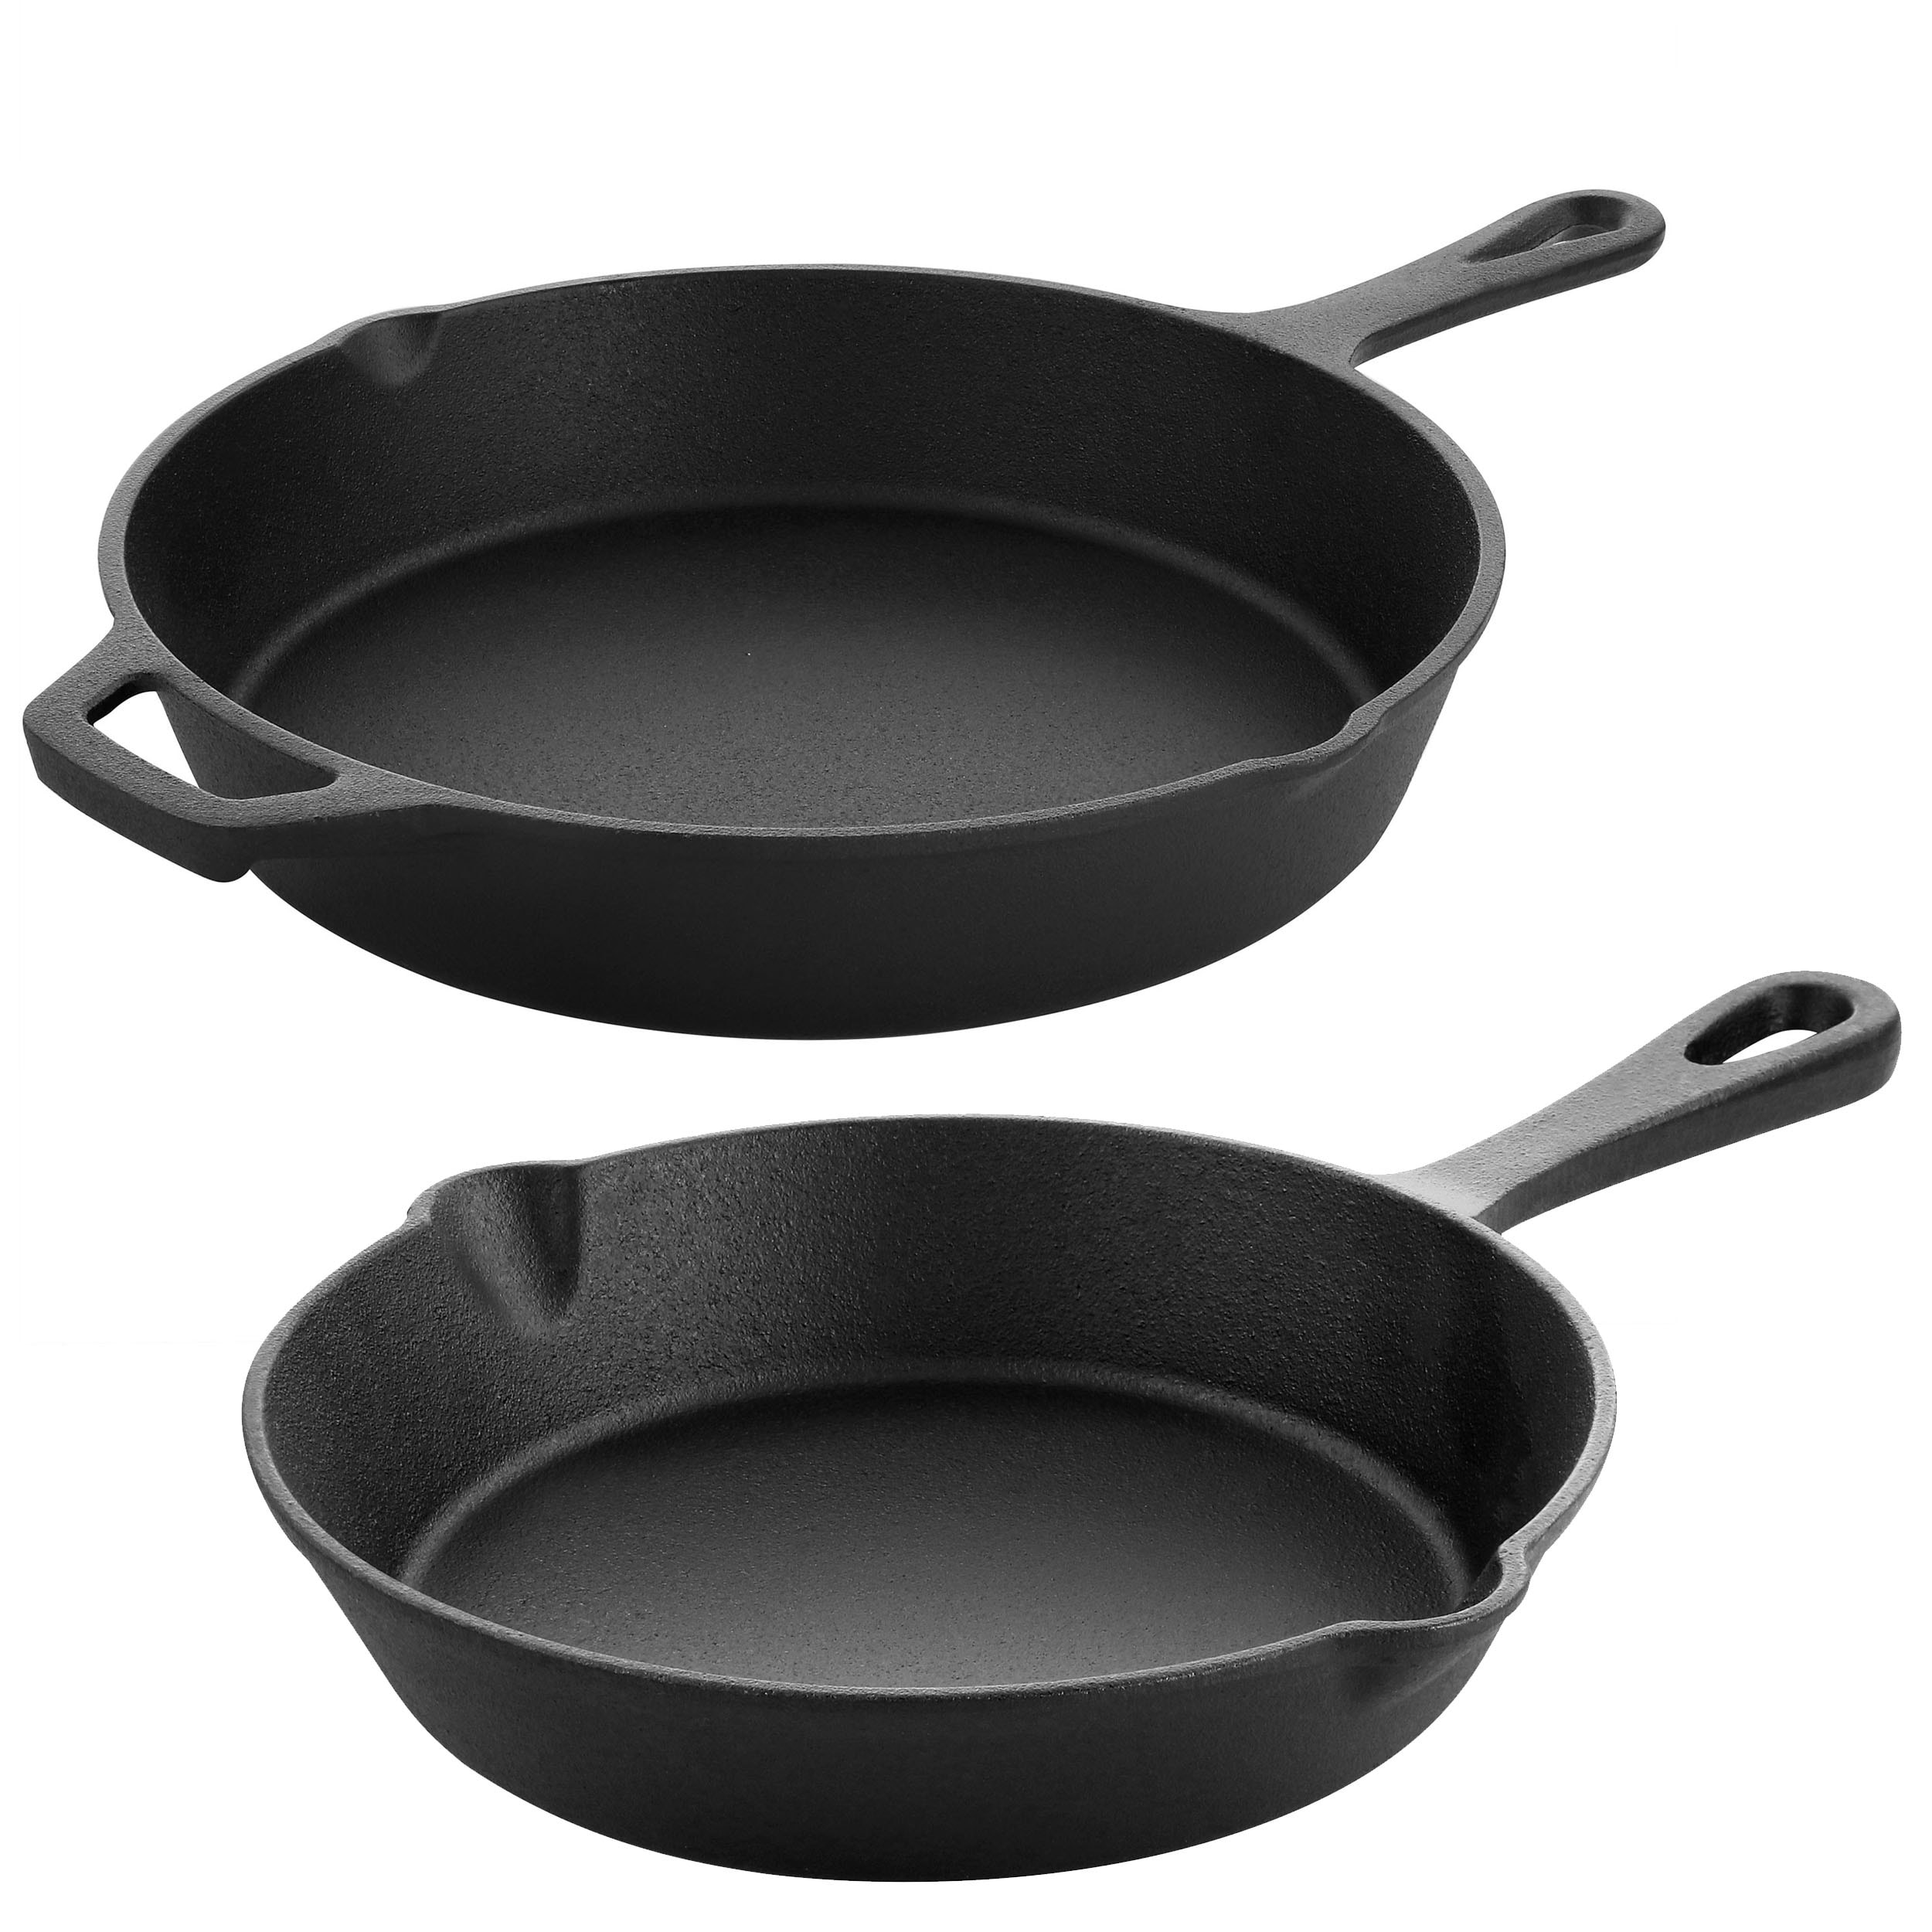 https://ak1.ostkcdn.com/images/products/is/images/direct/fc92dcfae22af76ae04f87bc286e9e15c08b77b7/MegaChef-10-Inch-and-8-Inch-Cast-Iron-Fry-Pan-Set.jpg